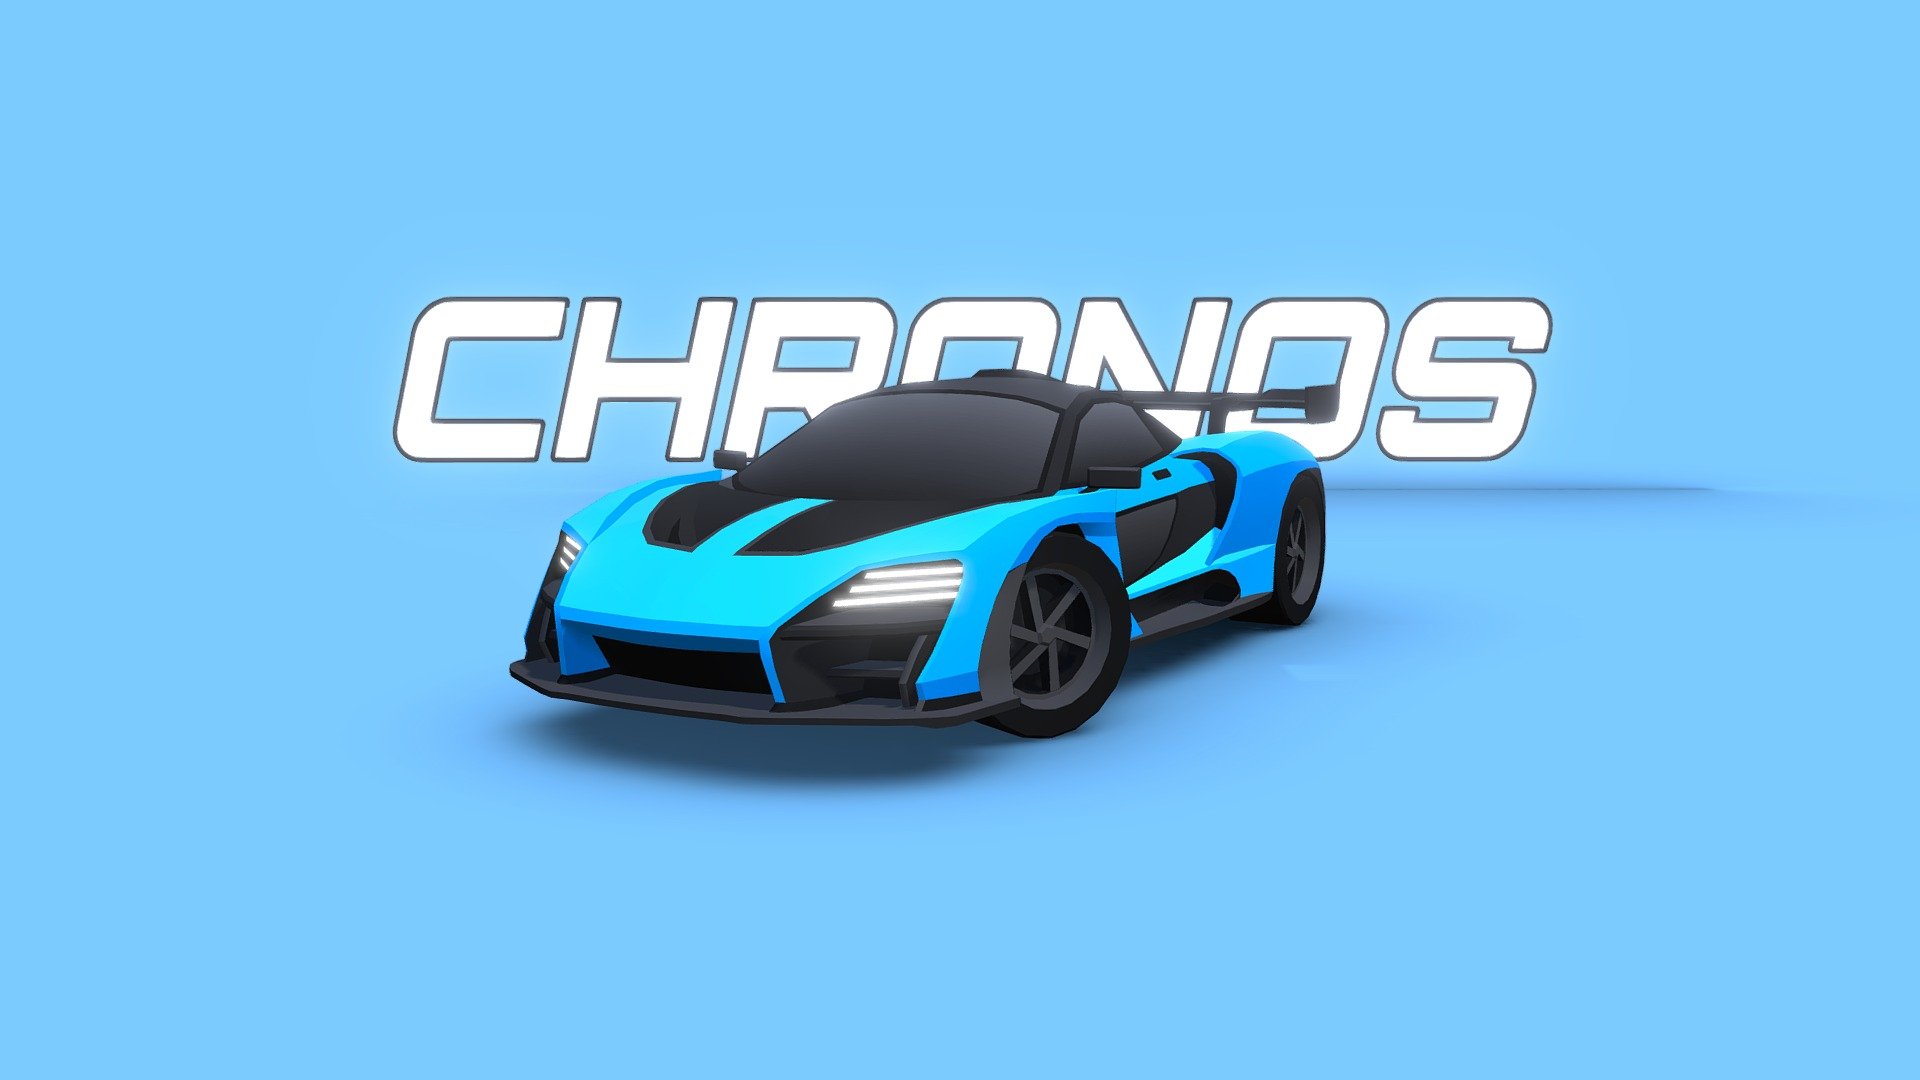 This car will be included in the July 2022 update of ARCADE: Ultimate Vehicles Pack 3d model